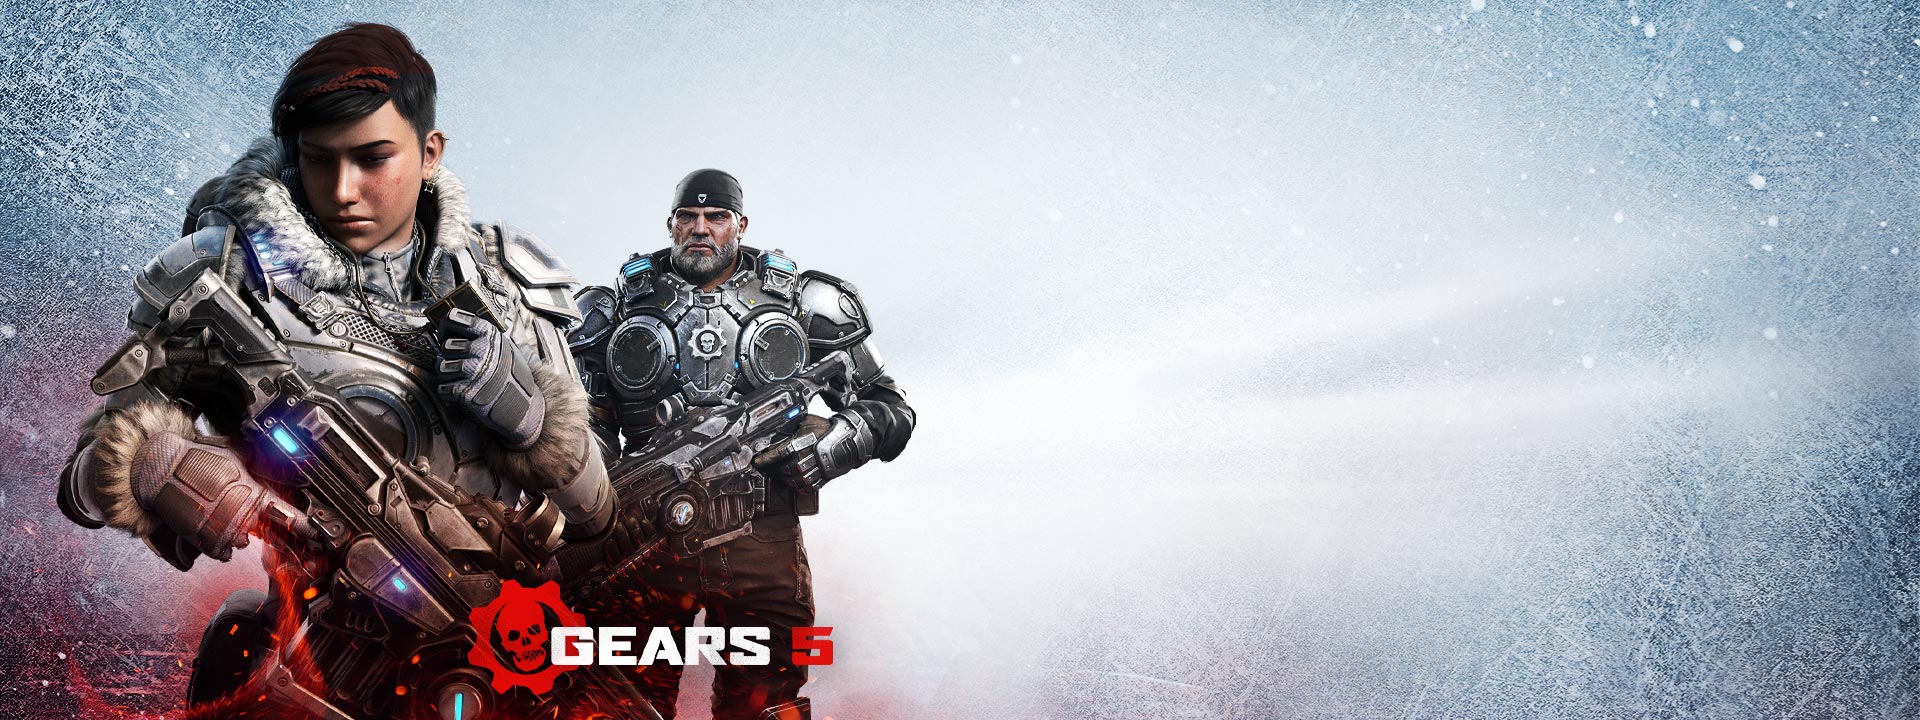 Gears 5, Kait and Marcus